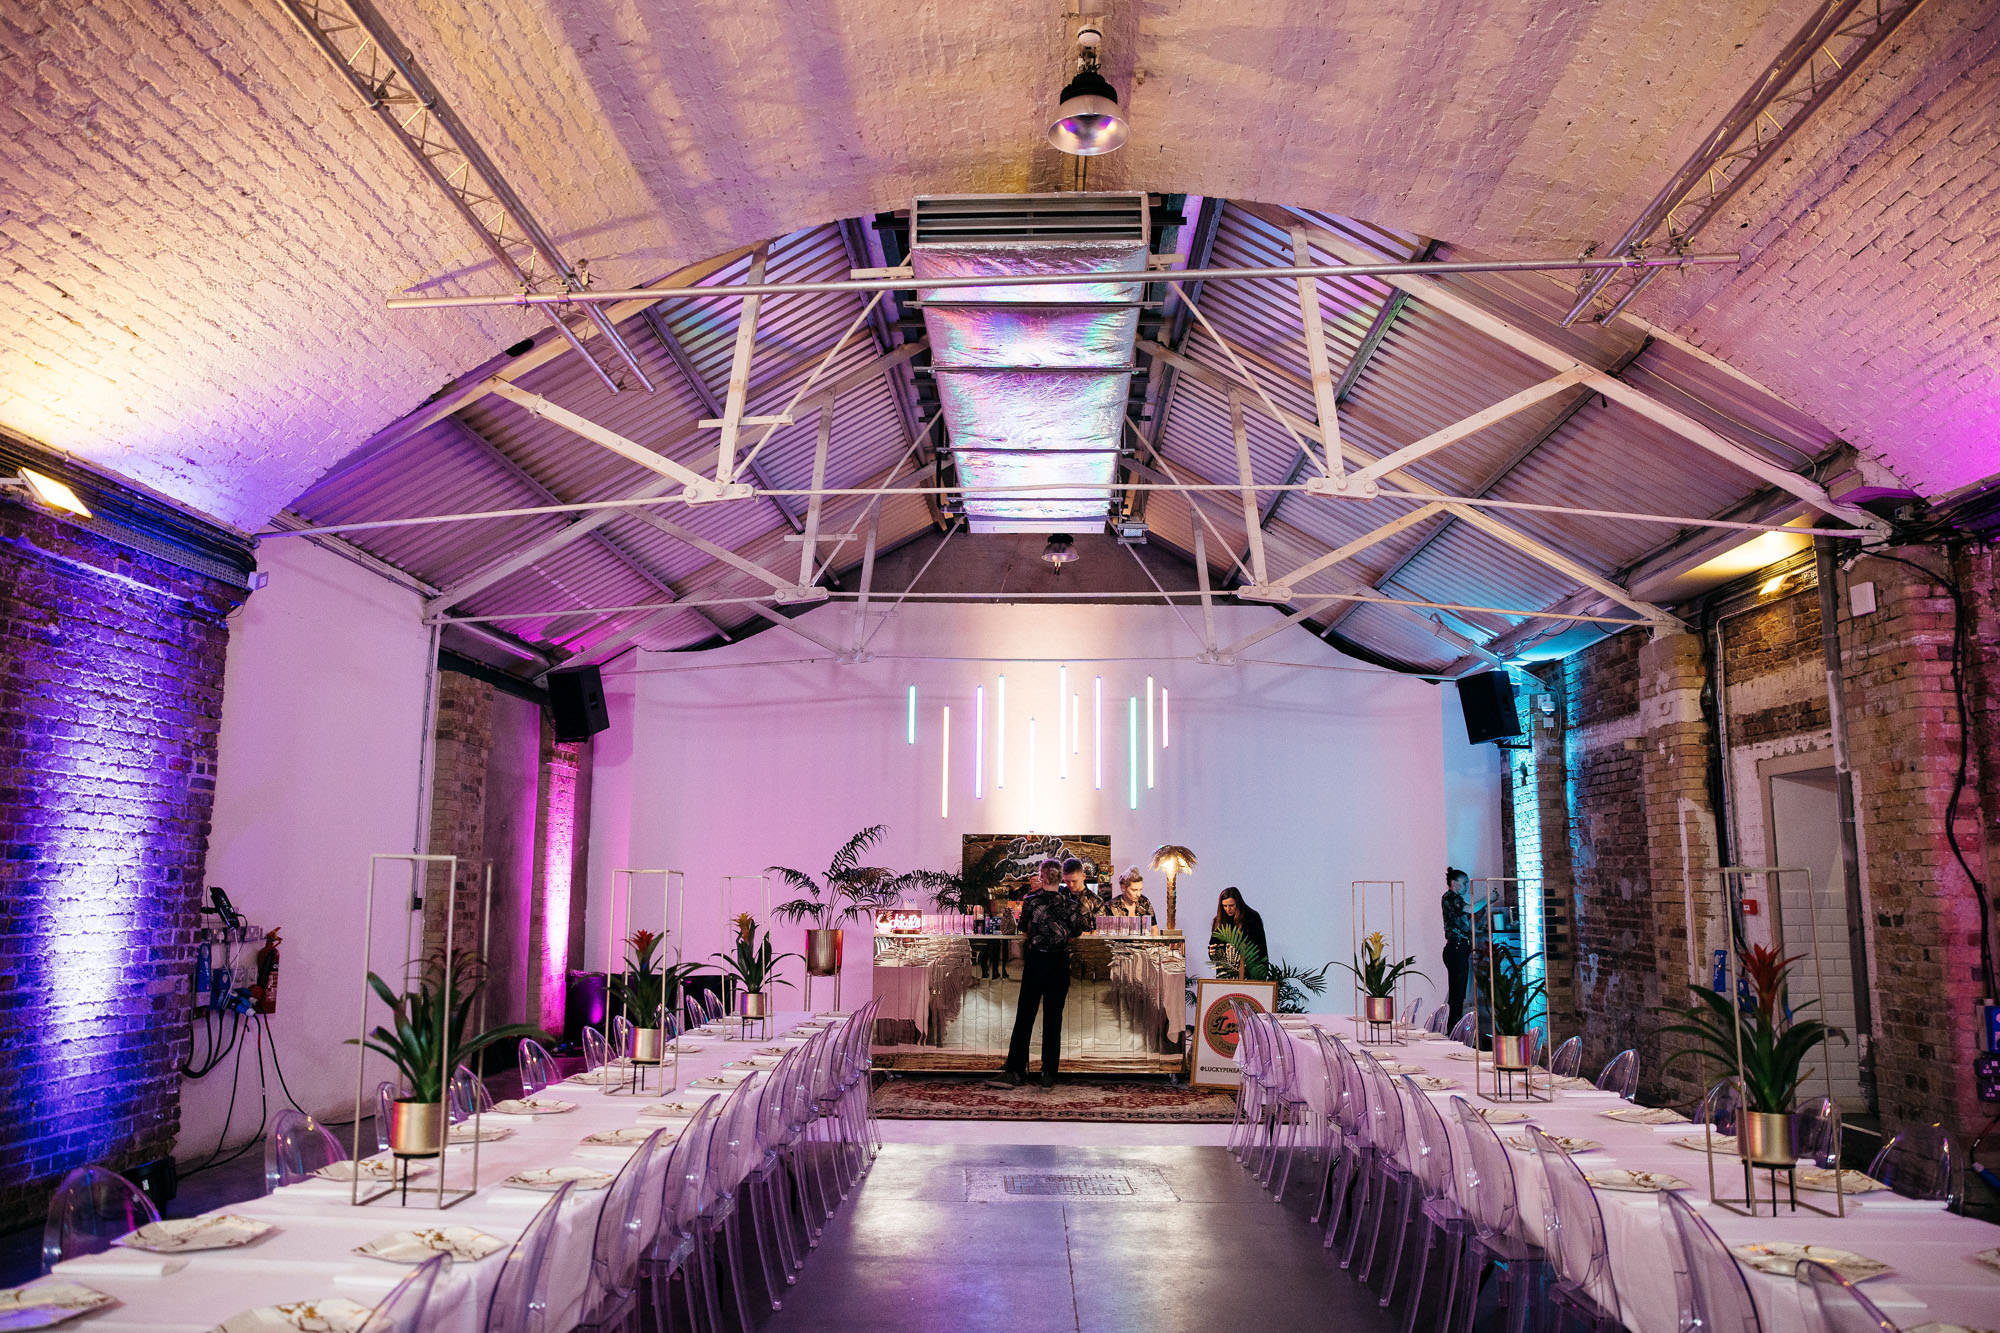 Perfectly Planned 4 You - London Creative Wedding Planner